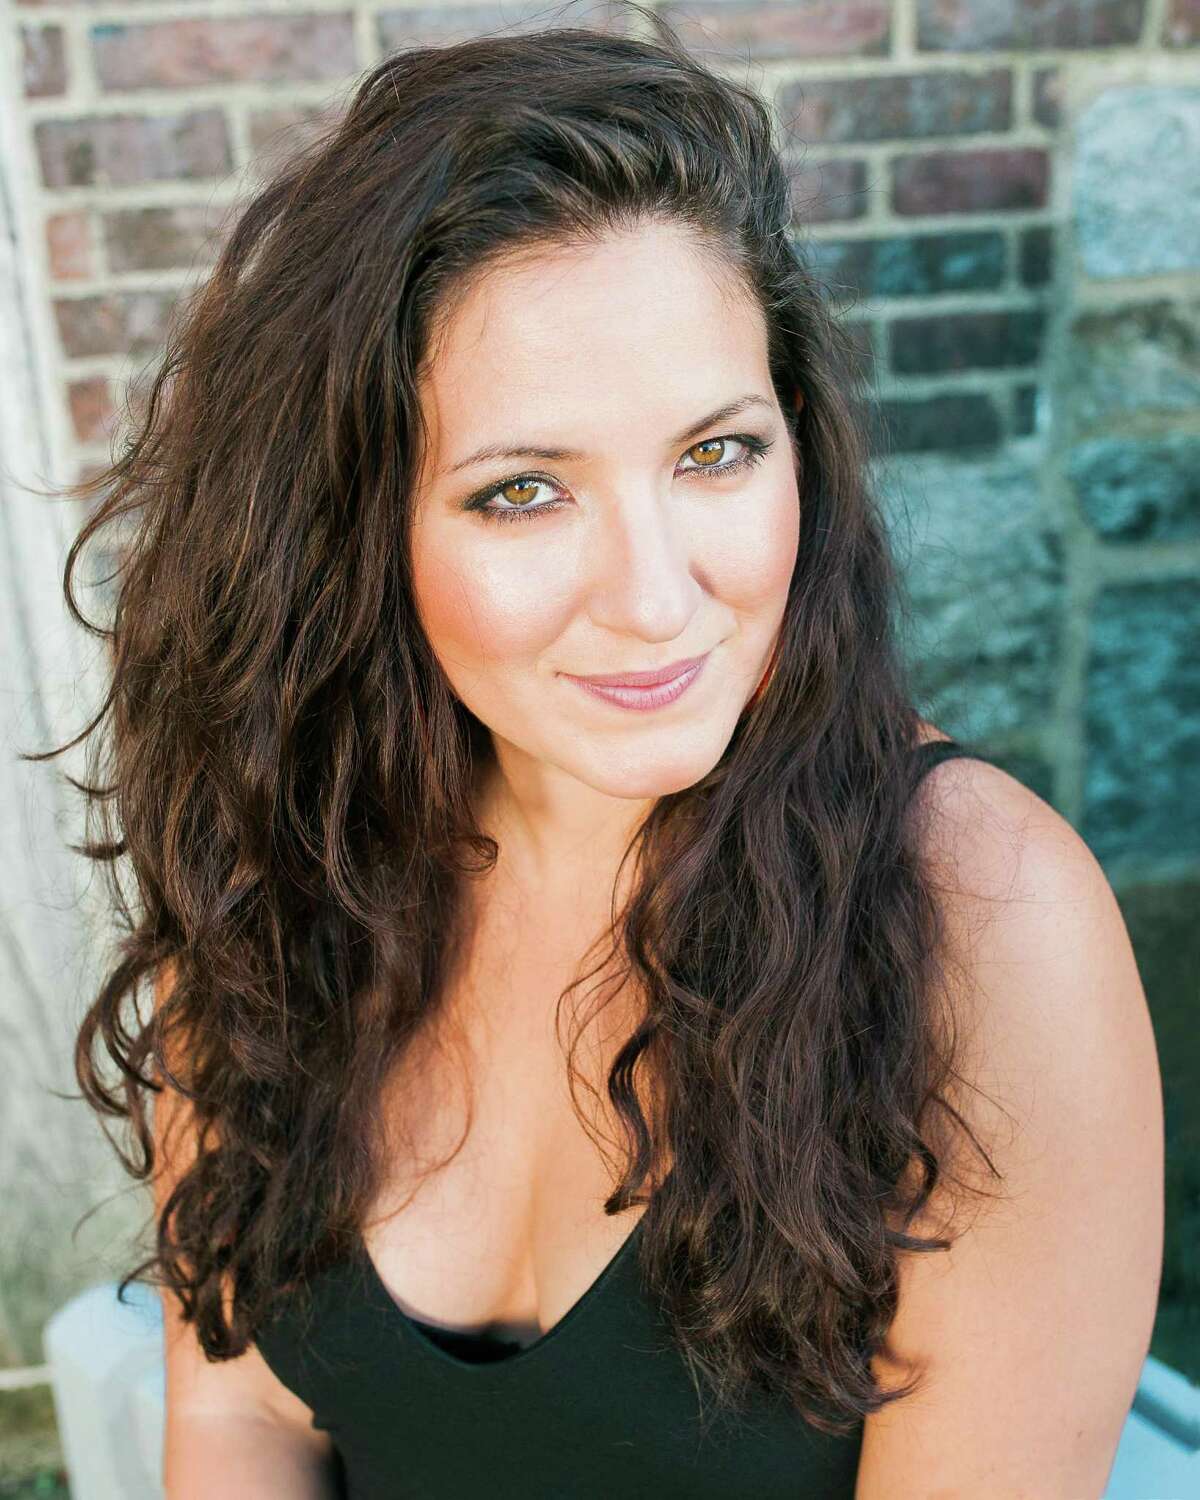 Jazz artist Nicole Zuraitis joins the Torrington Symphony on Saturday night for “All That Jazz” a concert with music by Count Basie, Duke Ellington, George Gershwin, Ella Fitzgerald, Peggy Lee and other great voices and sounds of the era.